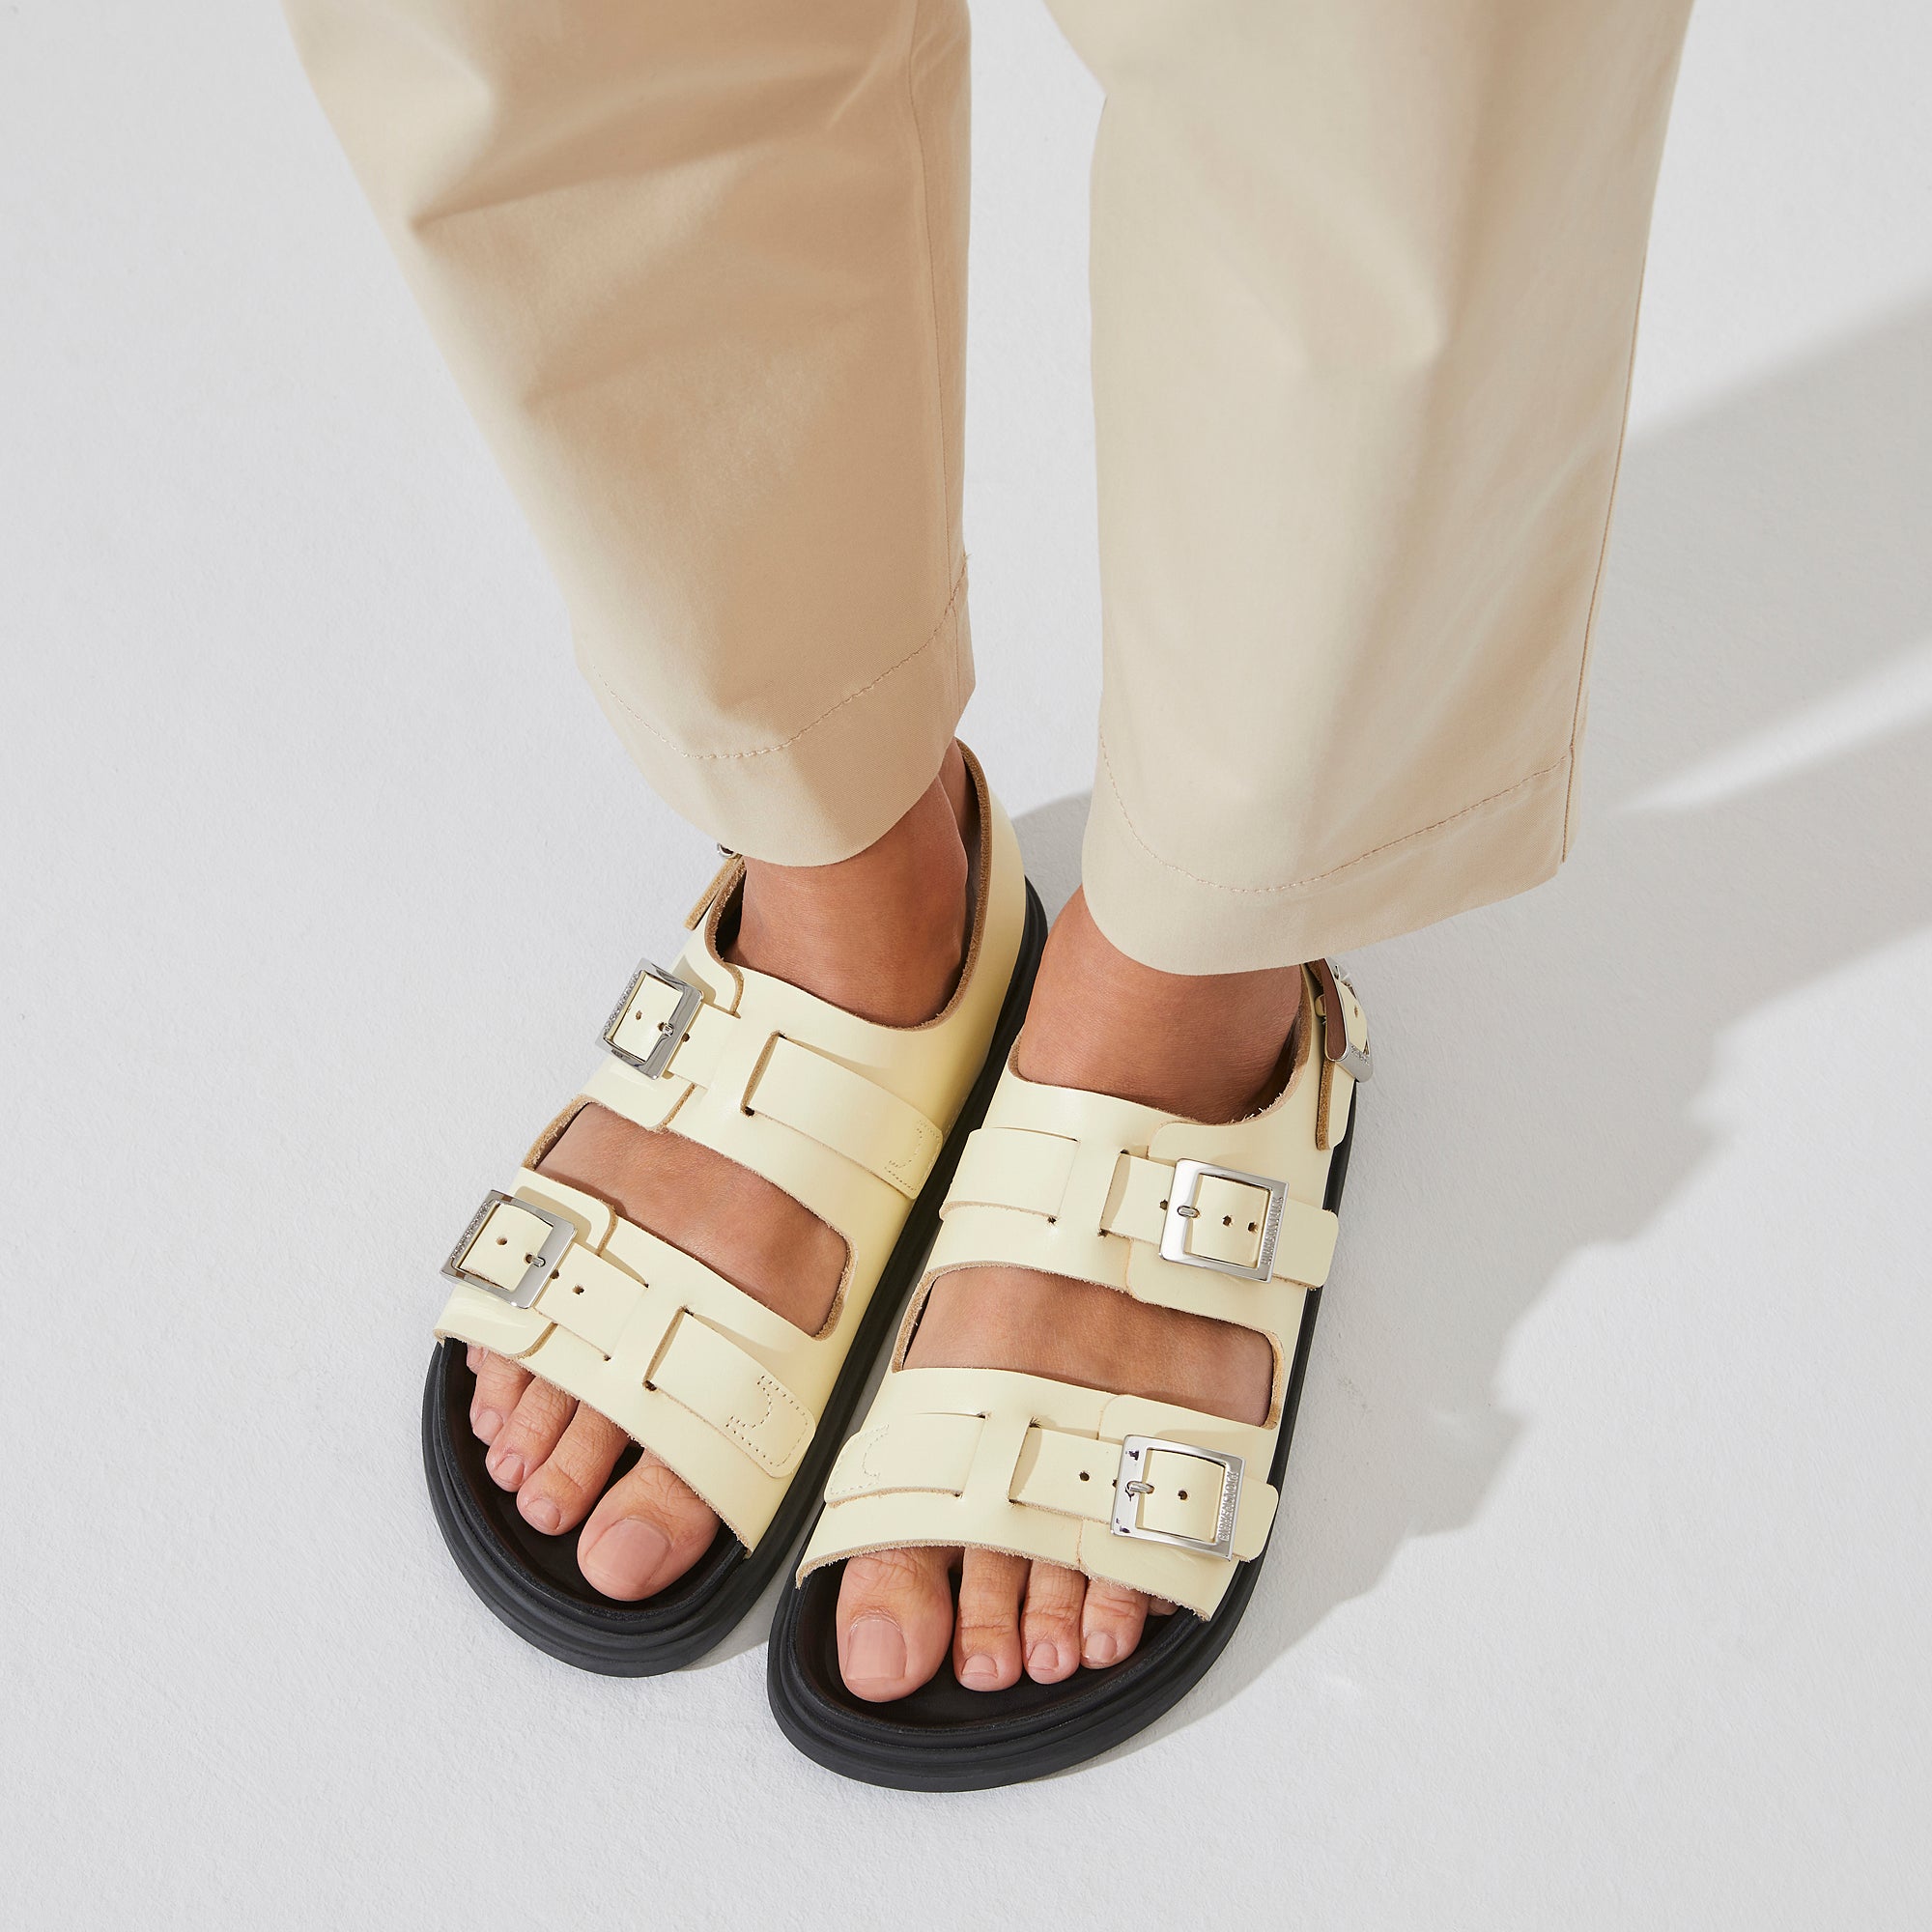 Birkenstock Cannes Exquisite Butter,natural Leather-calz.s Donna - 3